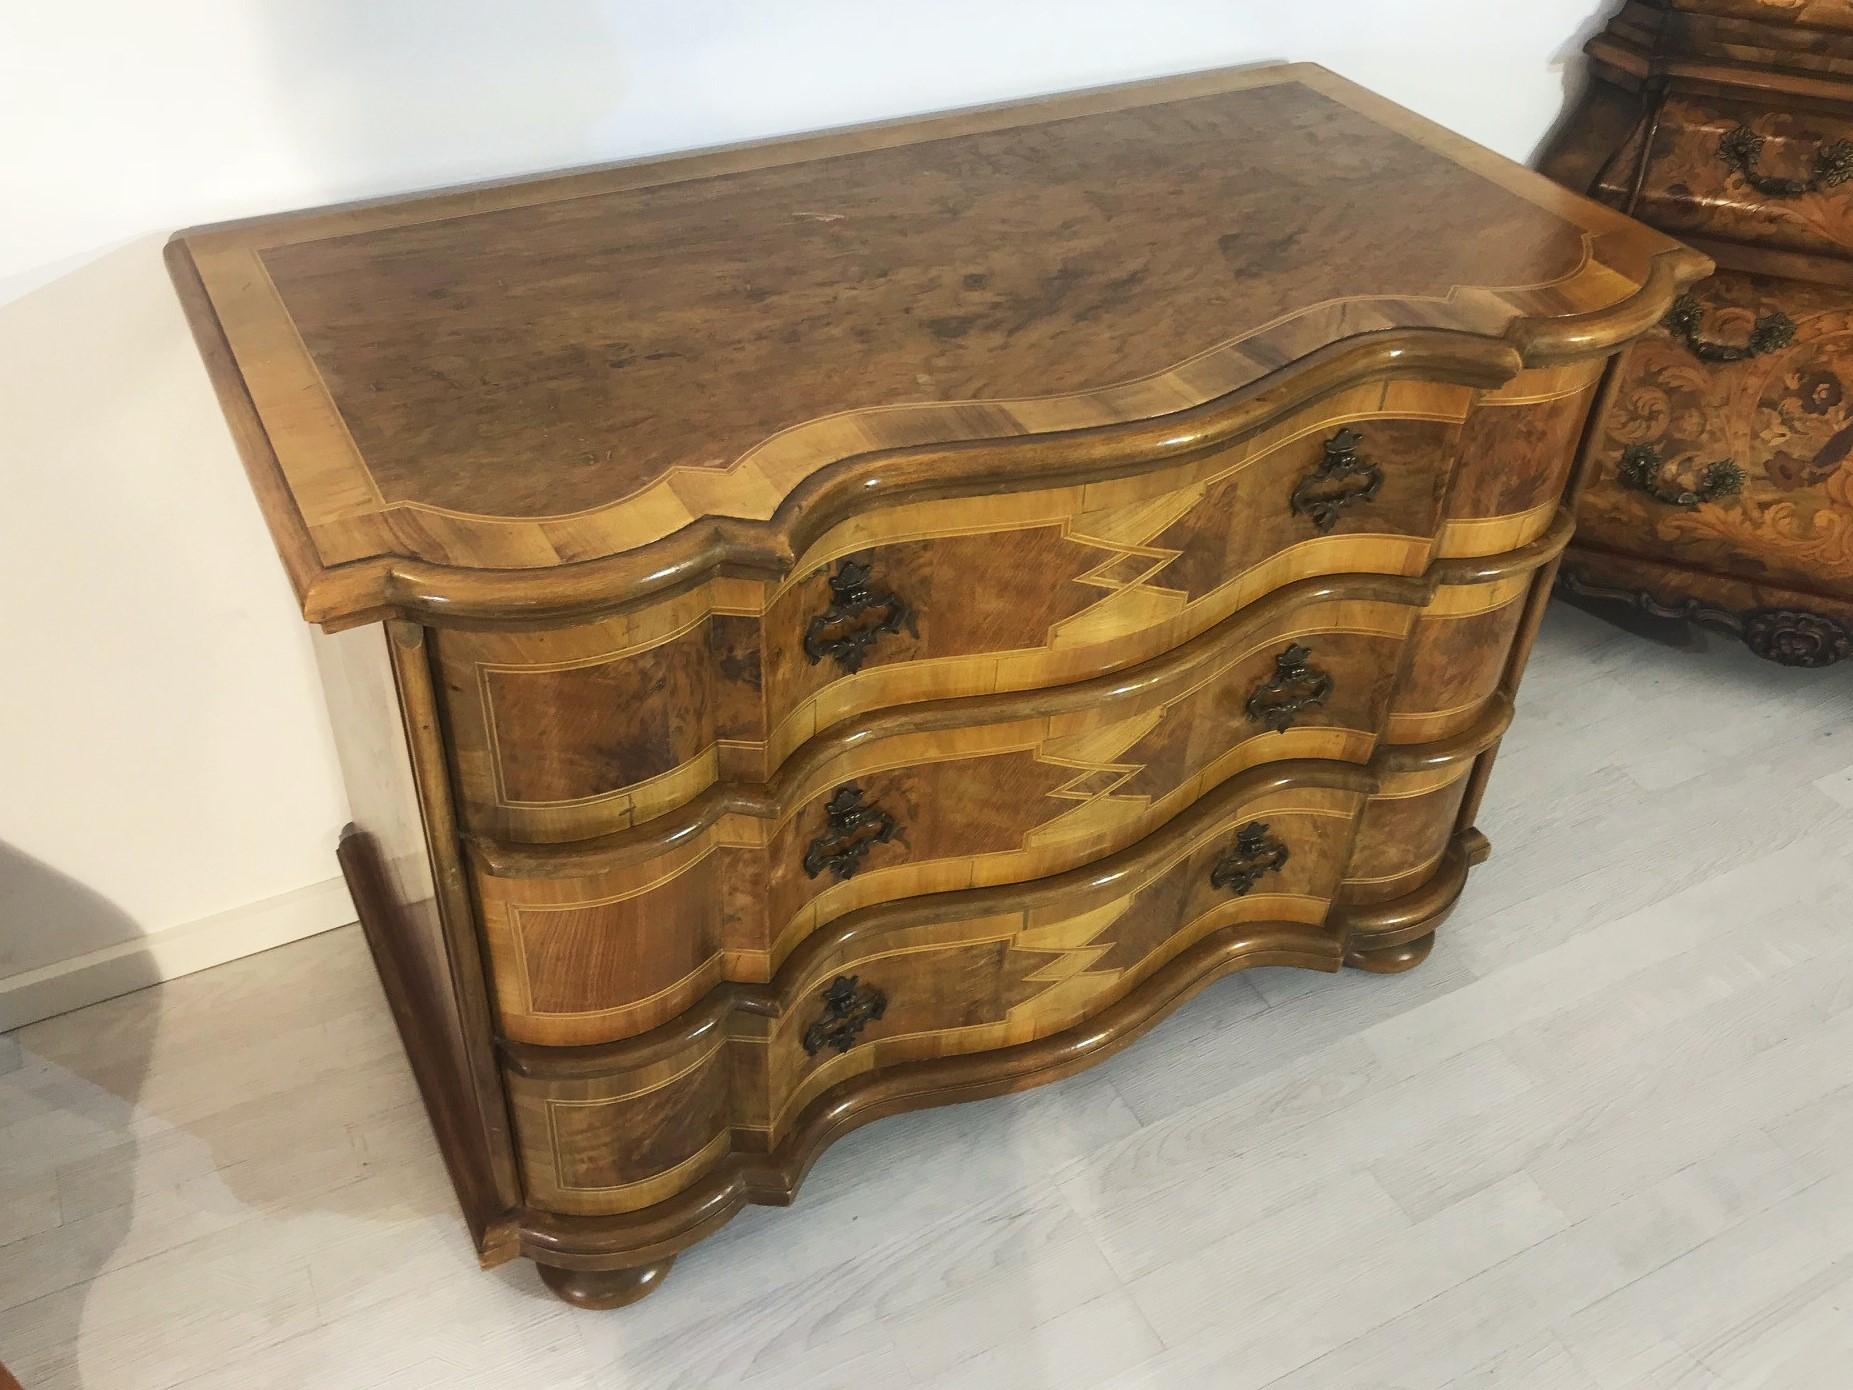 Curved baroque style chest of drawers. The high quality piece of furniture was made in the 1970s in Germany and convinces with a typical Baroque style design and beautiful ornamentation within the walnut wood. On the drawers fronts you will find six